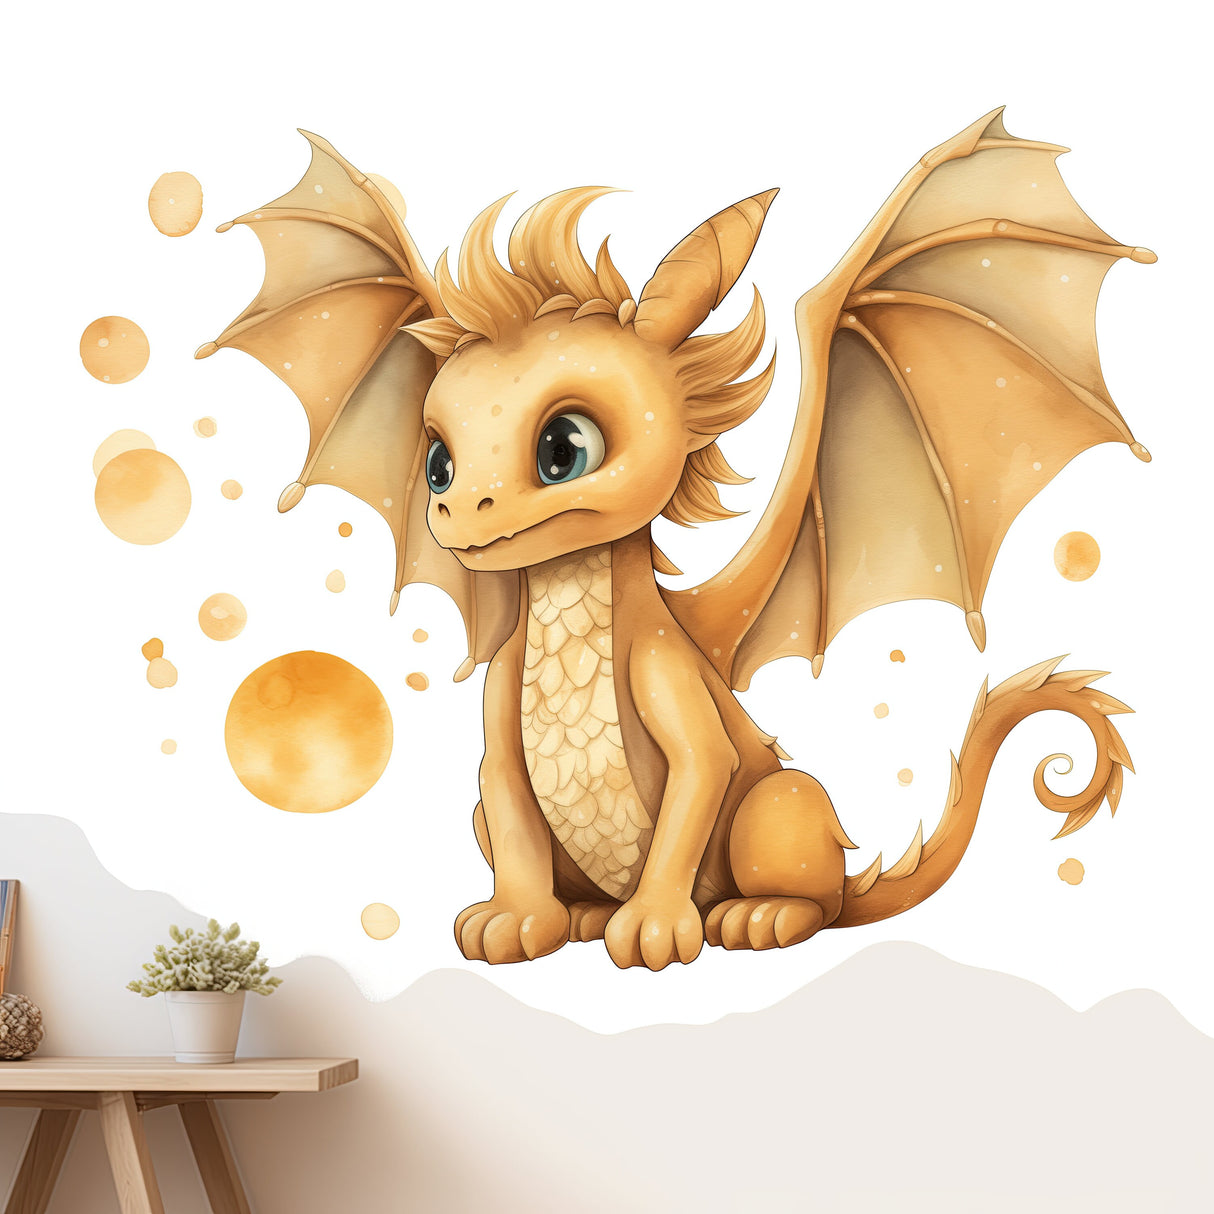 Enchanted Gold Dragon Wall Decal - Whimsical Baby Dragon Sticker Mural